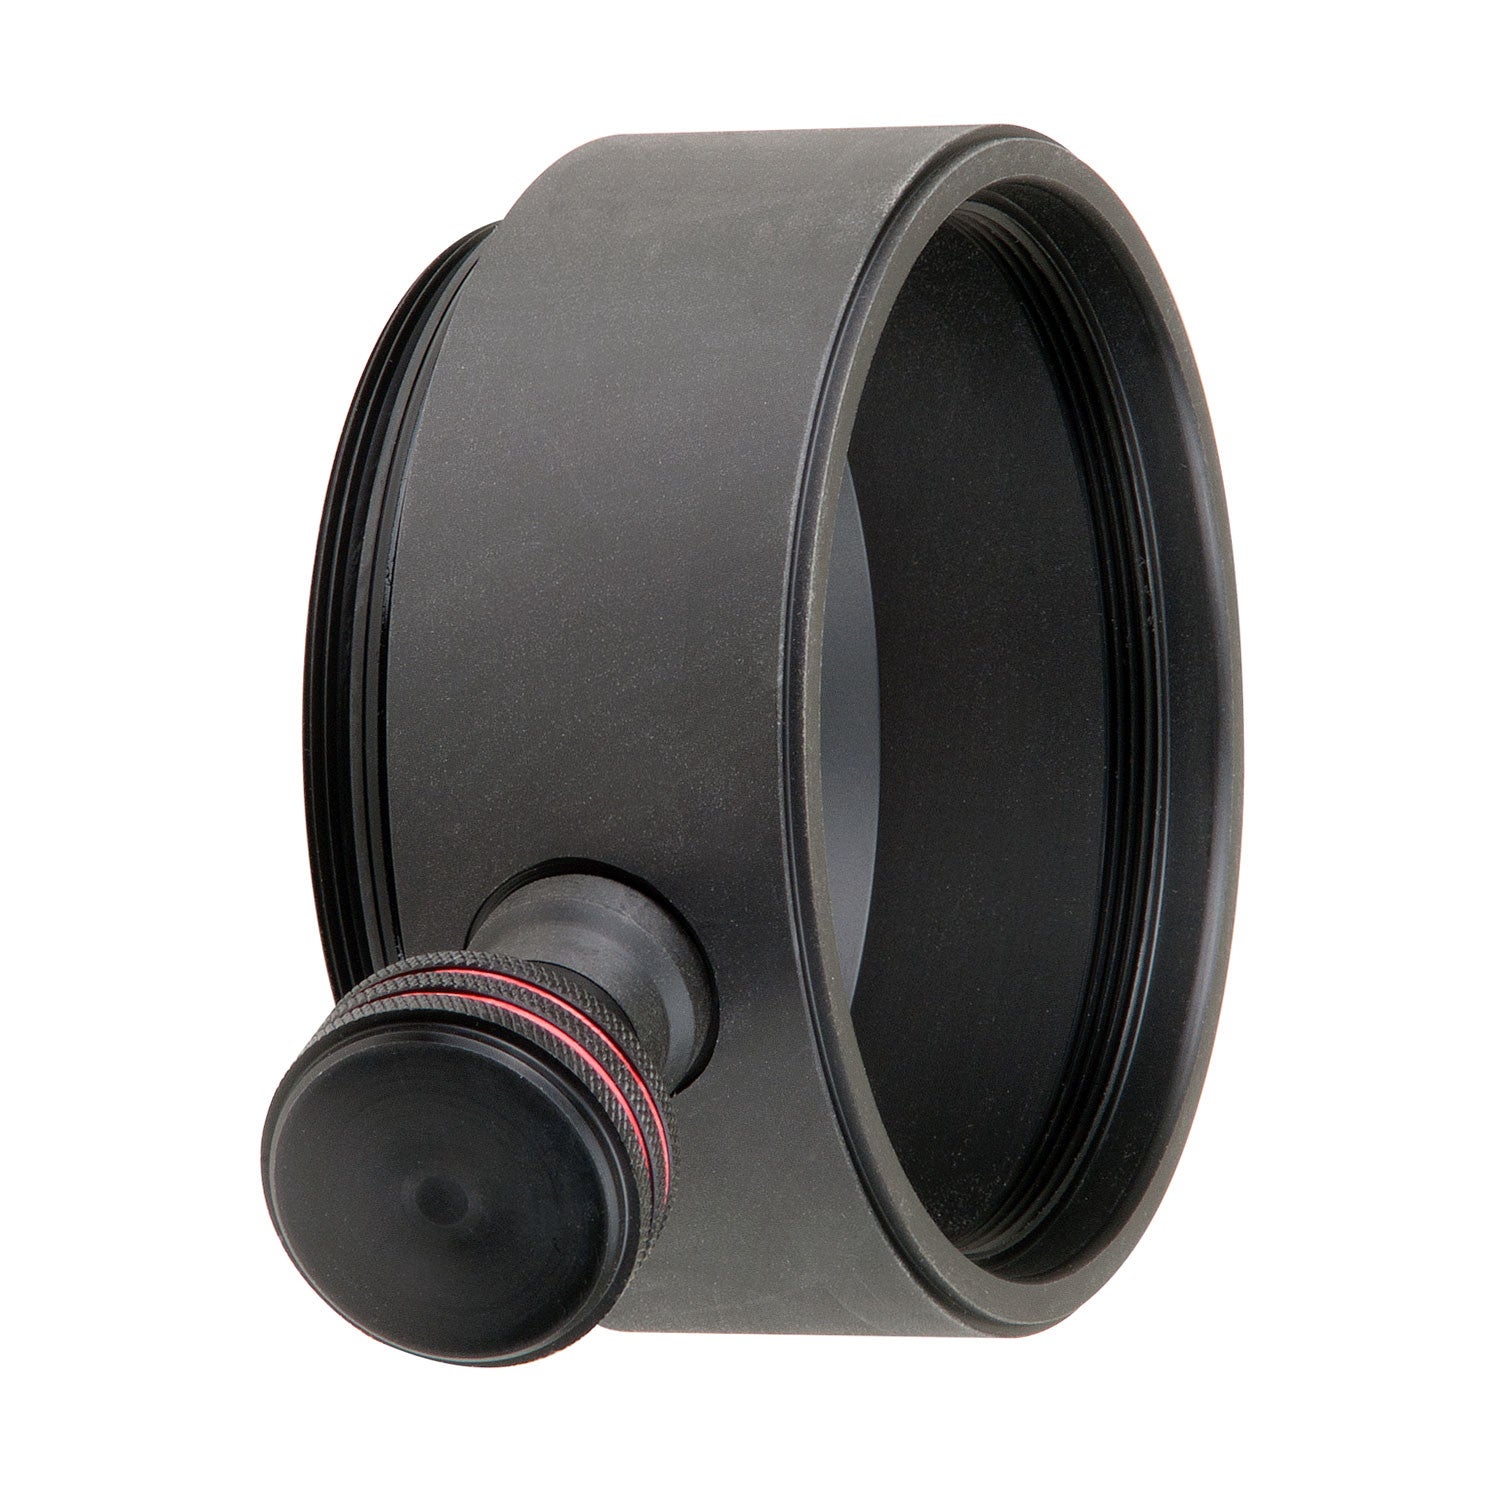 Modular 1.75 Inch Extension Ring with Focus